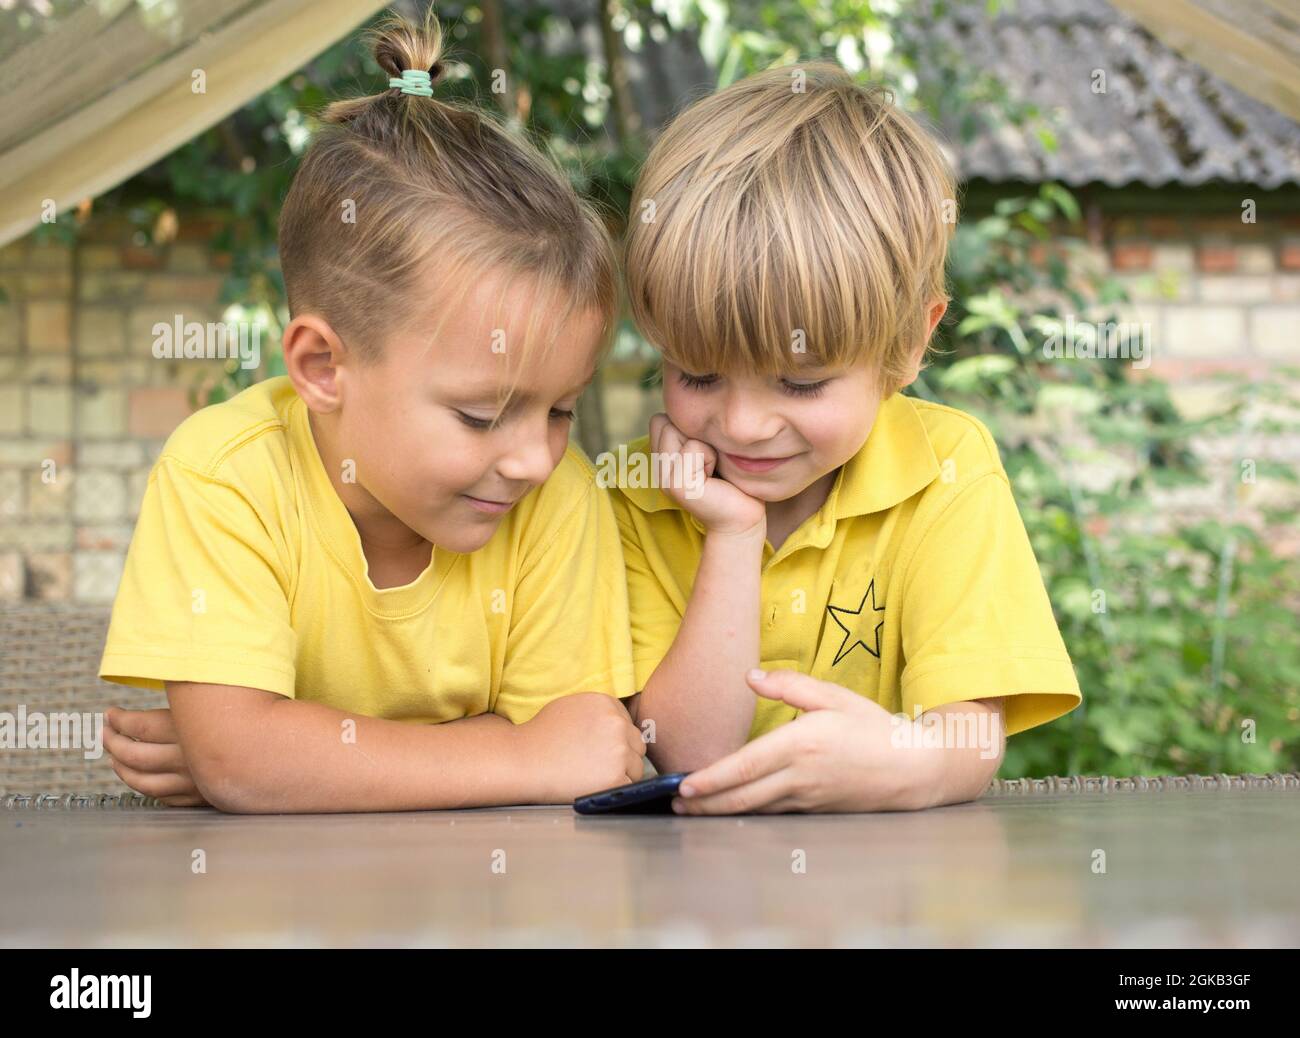 Cute 5 year old boys in yellow T-shirts are looking at phone screen in front of them with enthusiasm. modern children, digital era, curiosity, passion Stock Photo